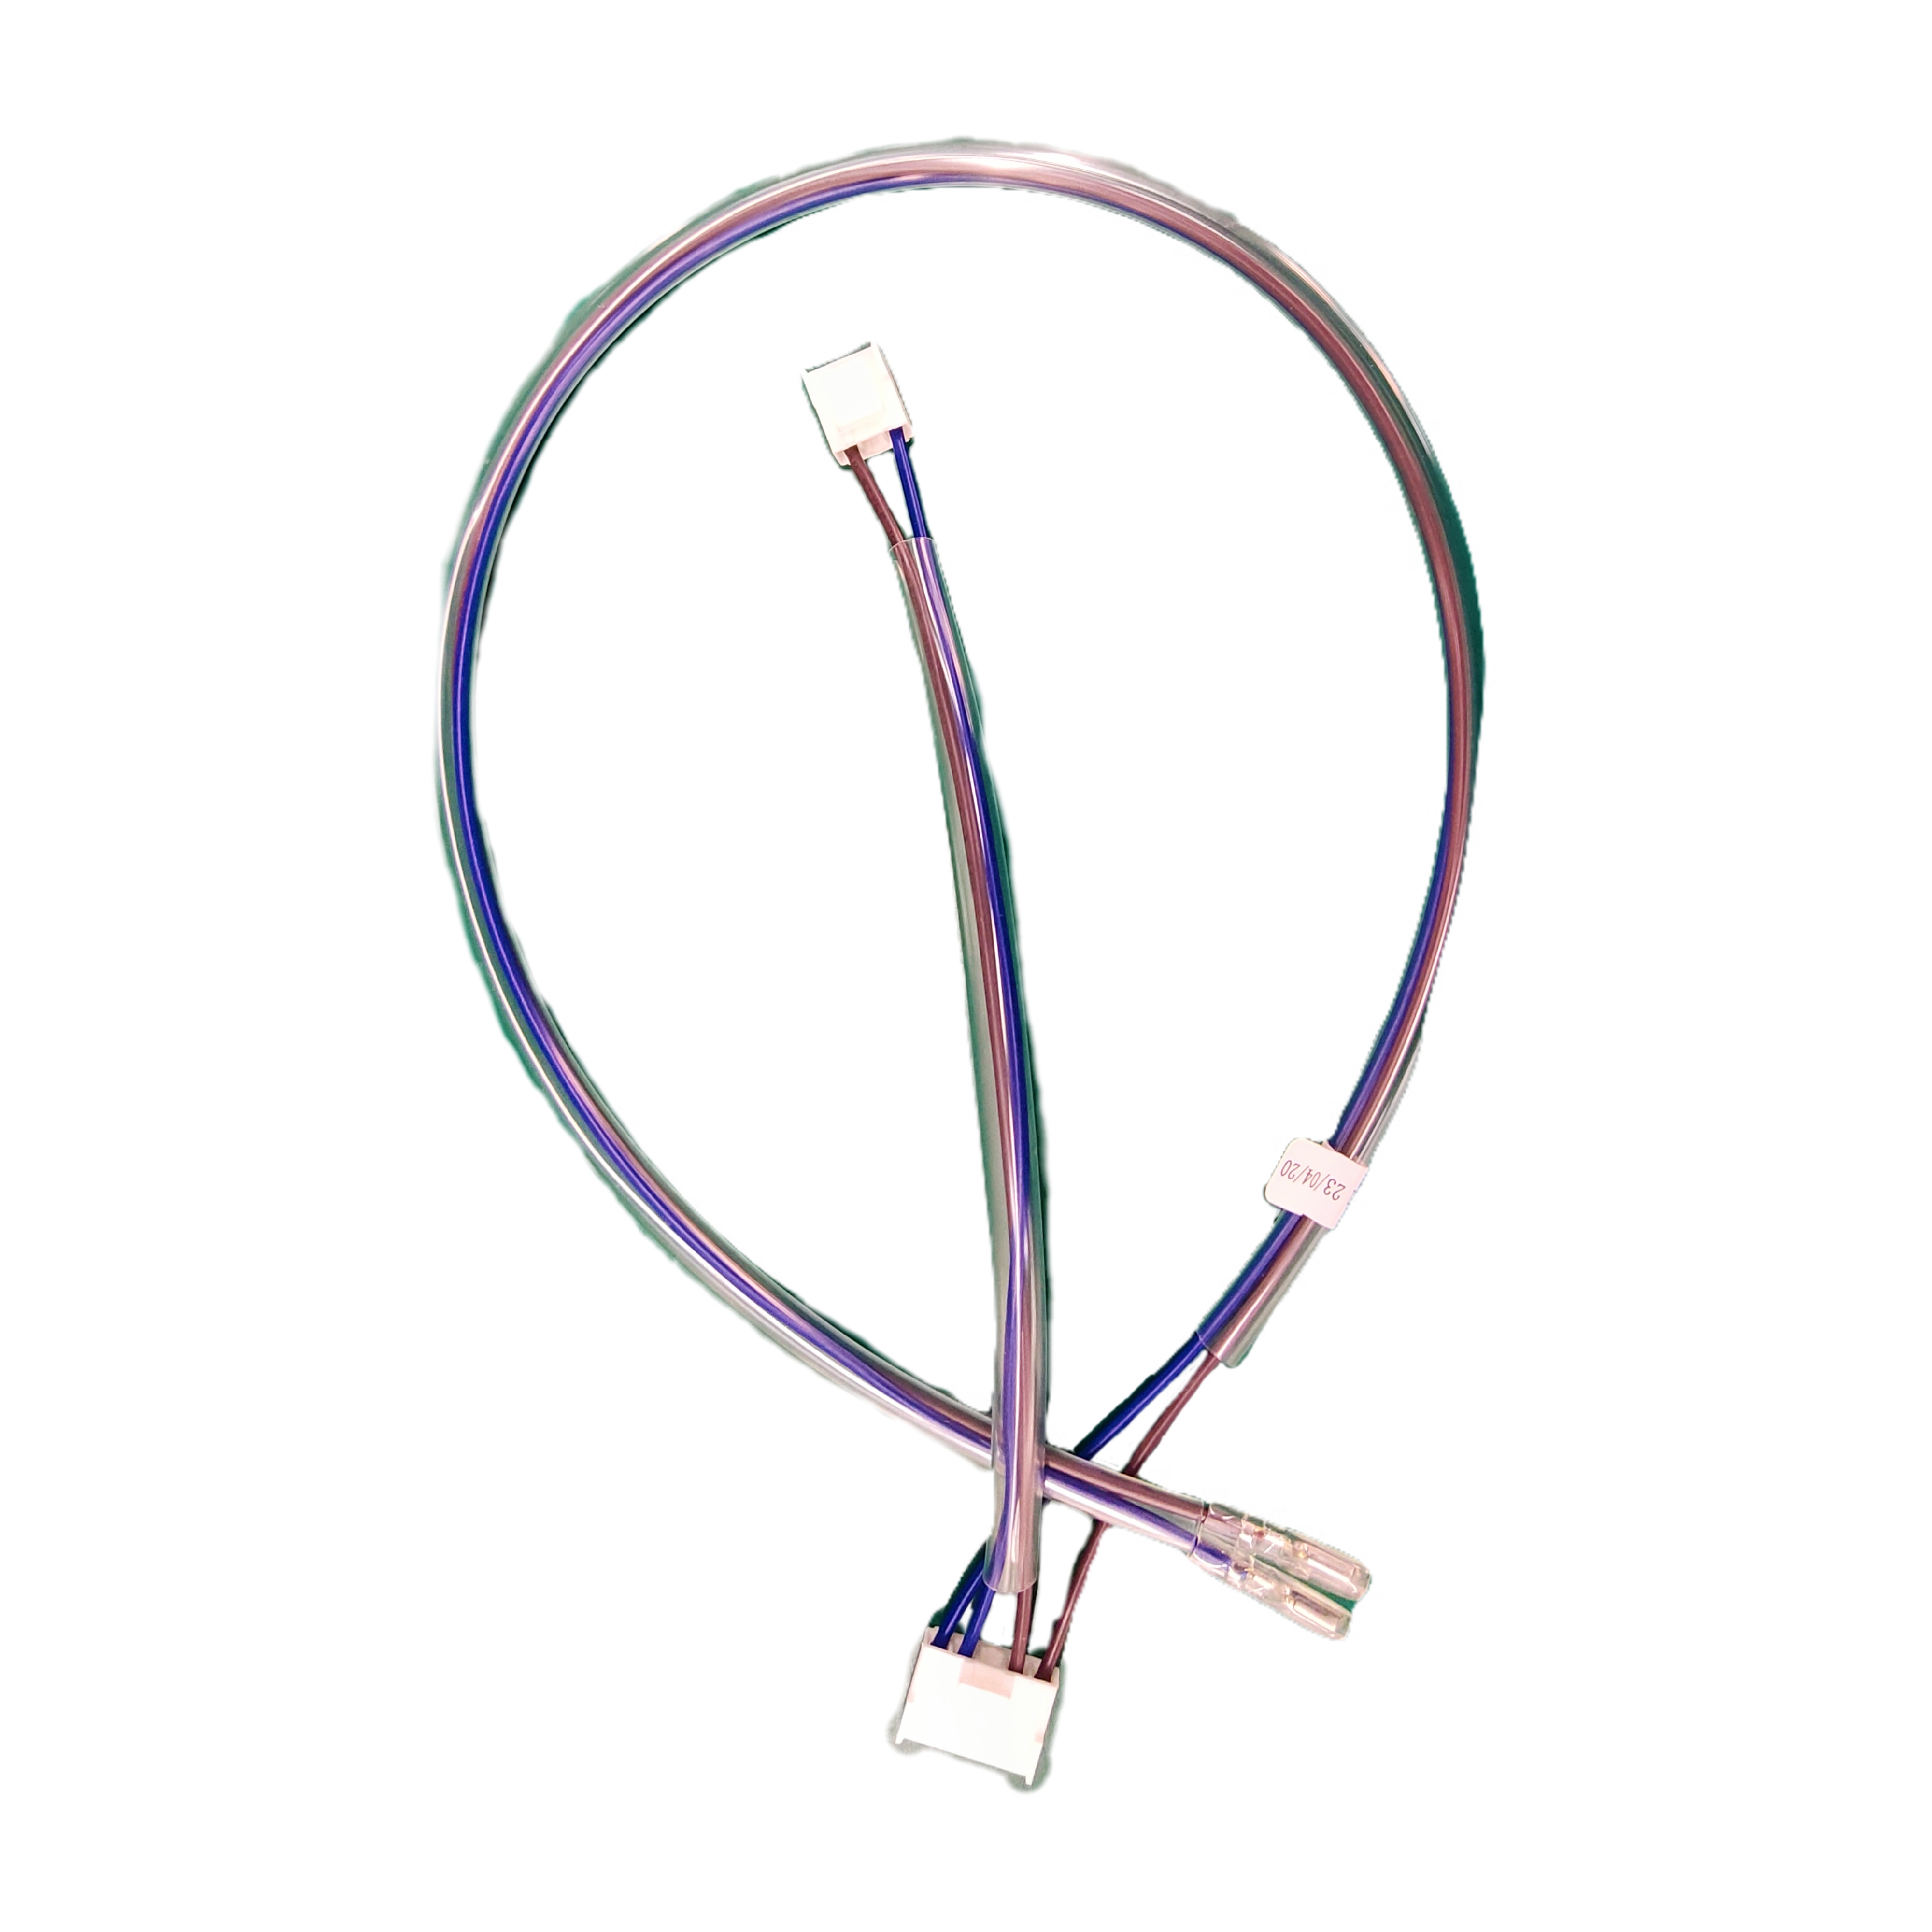 Oxygen-free copper ACDC Input Interface To Connect The Medical Wire Harness